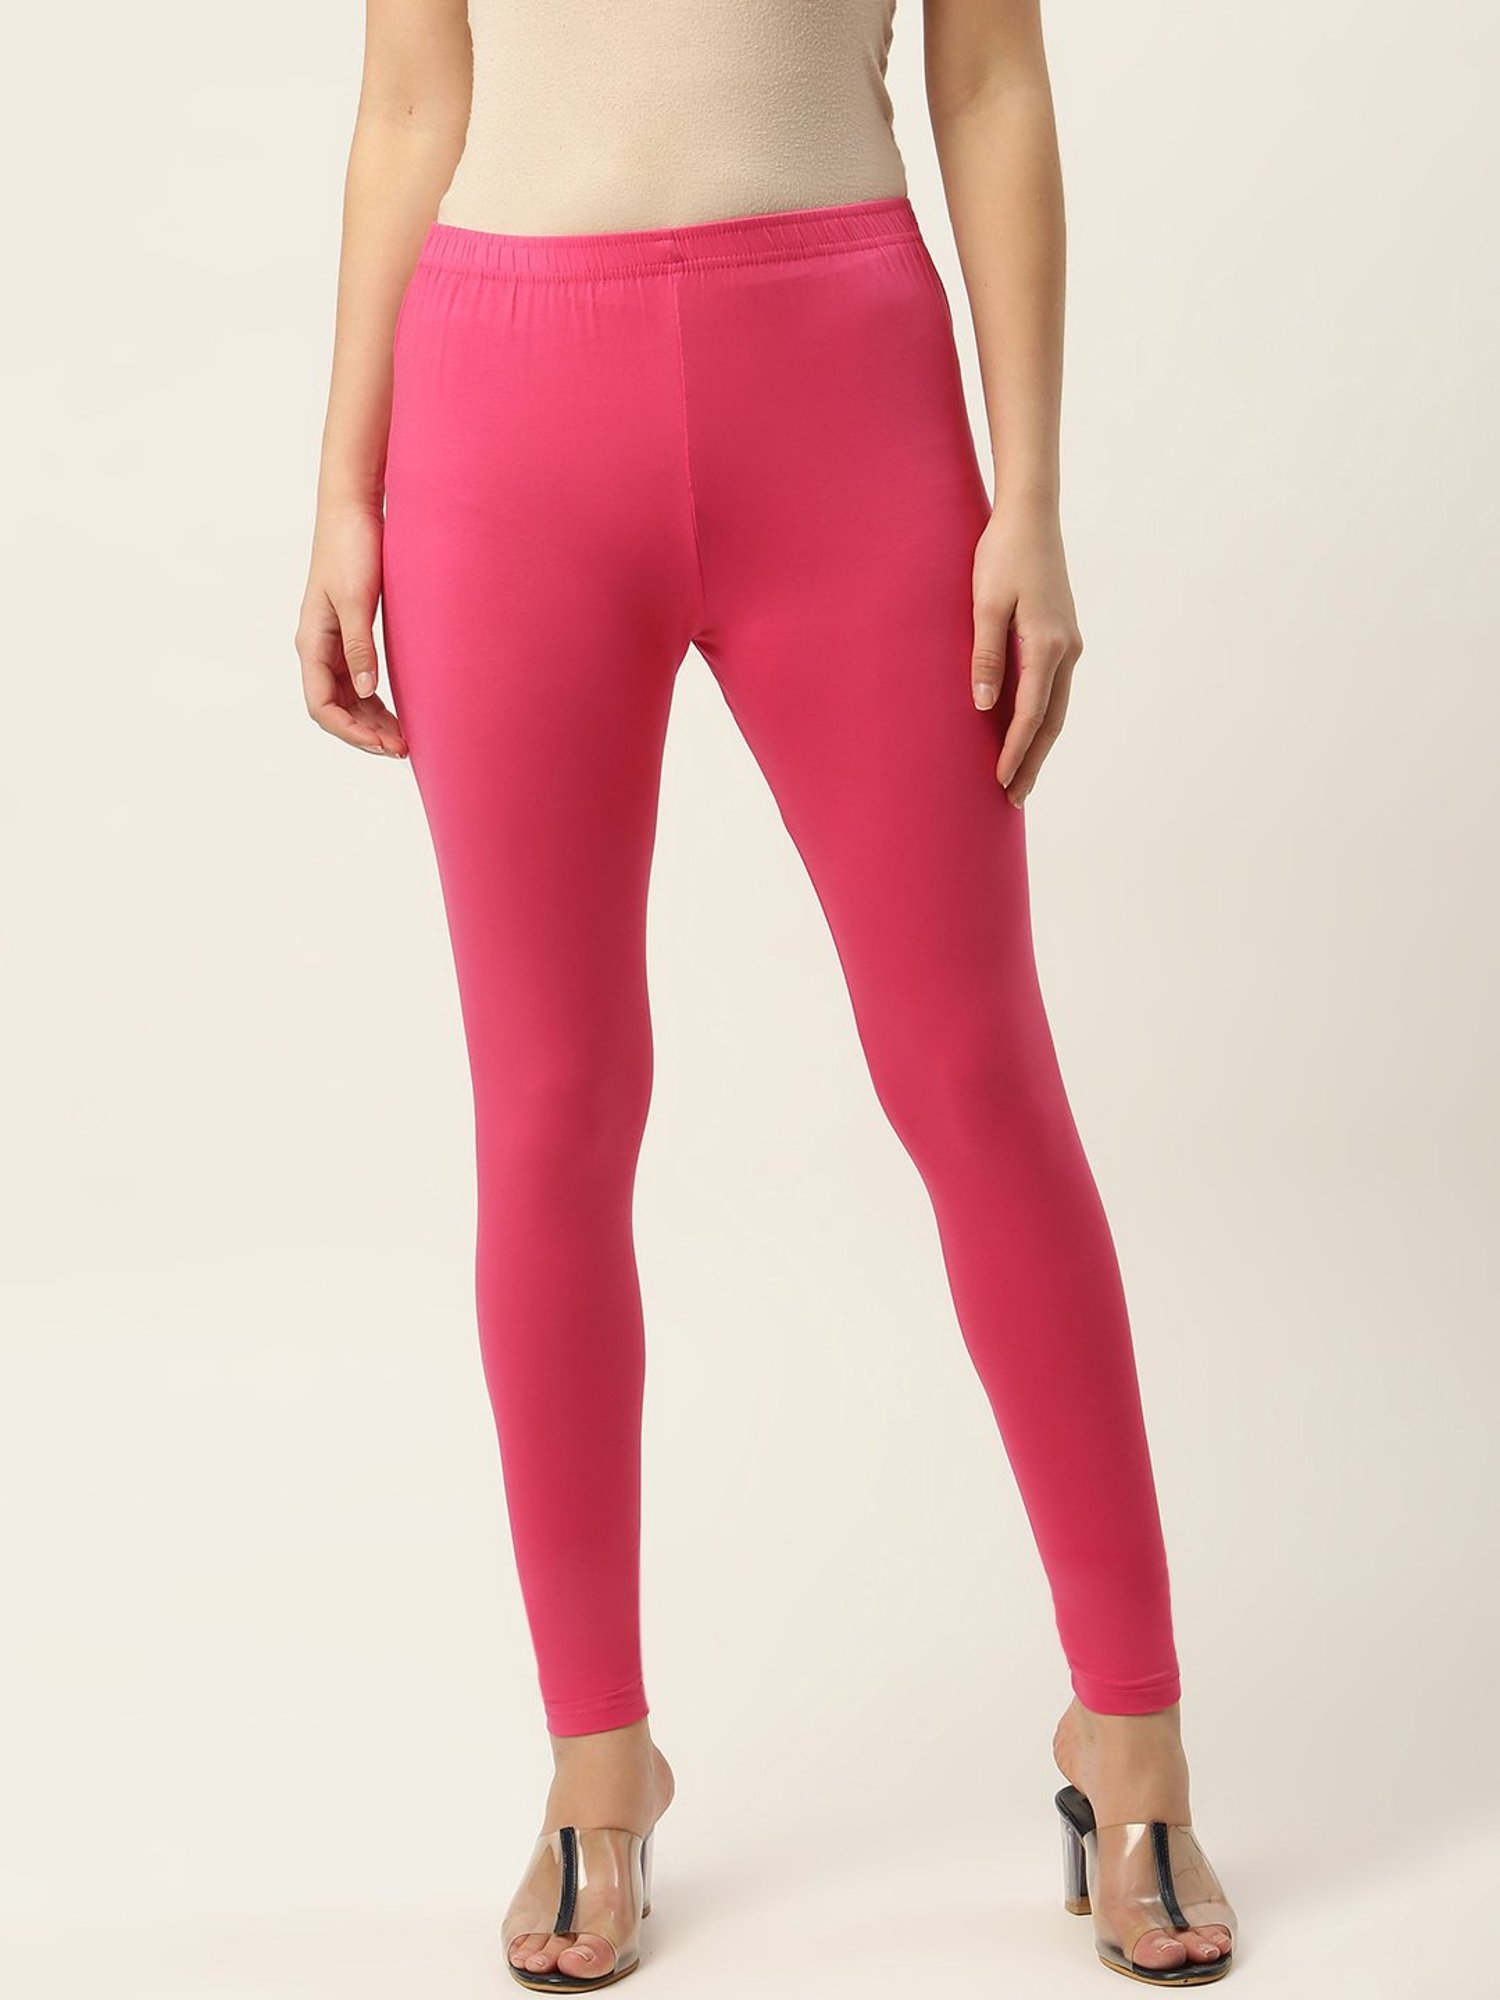 Hot pink workout set | Womens workout outfits, Workout outfit, Fabletics  outfit